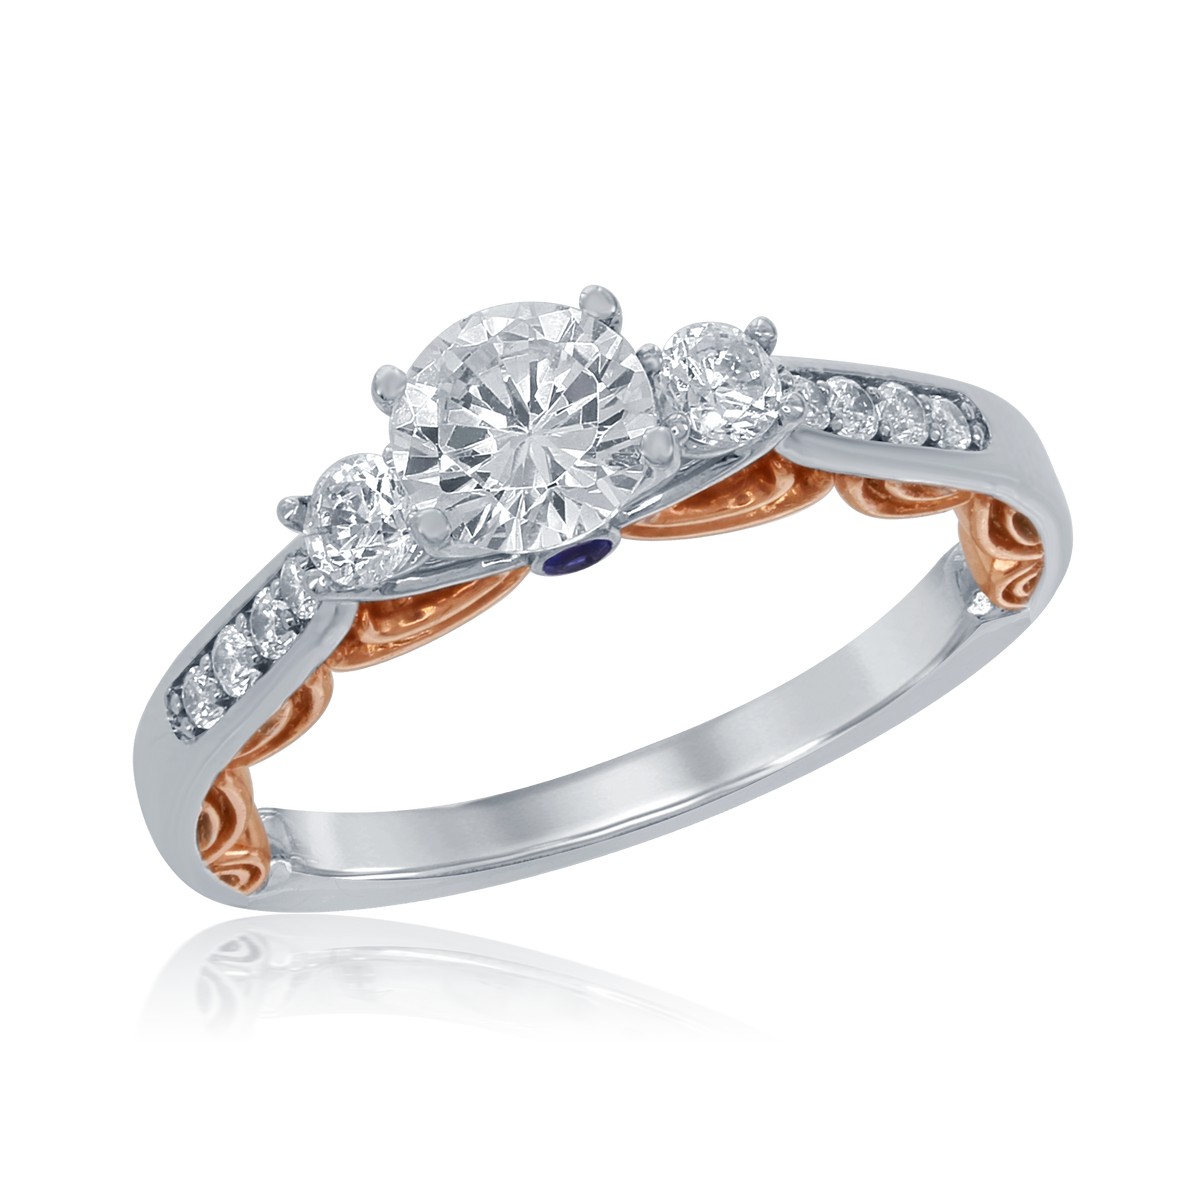 CINDERELLA BRIDAL RING WITH DRESS SILHOUETTE-Howard&#39;s Diamond Center-Howard&#39;s Diamond Center